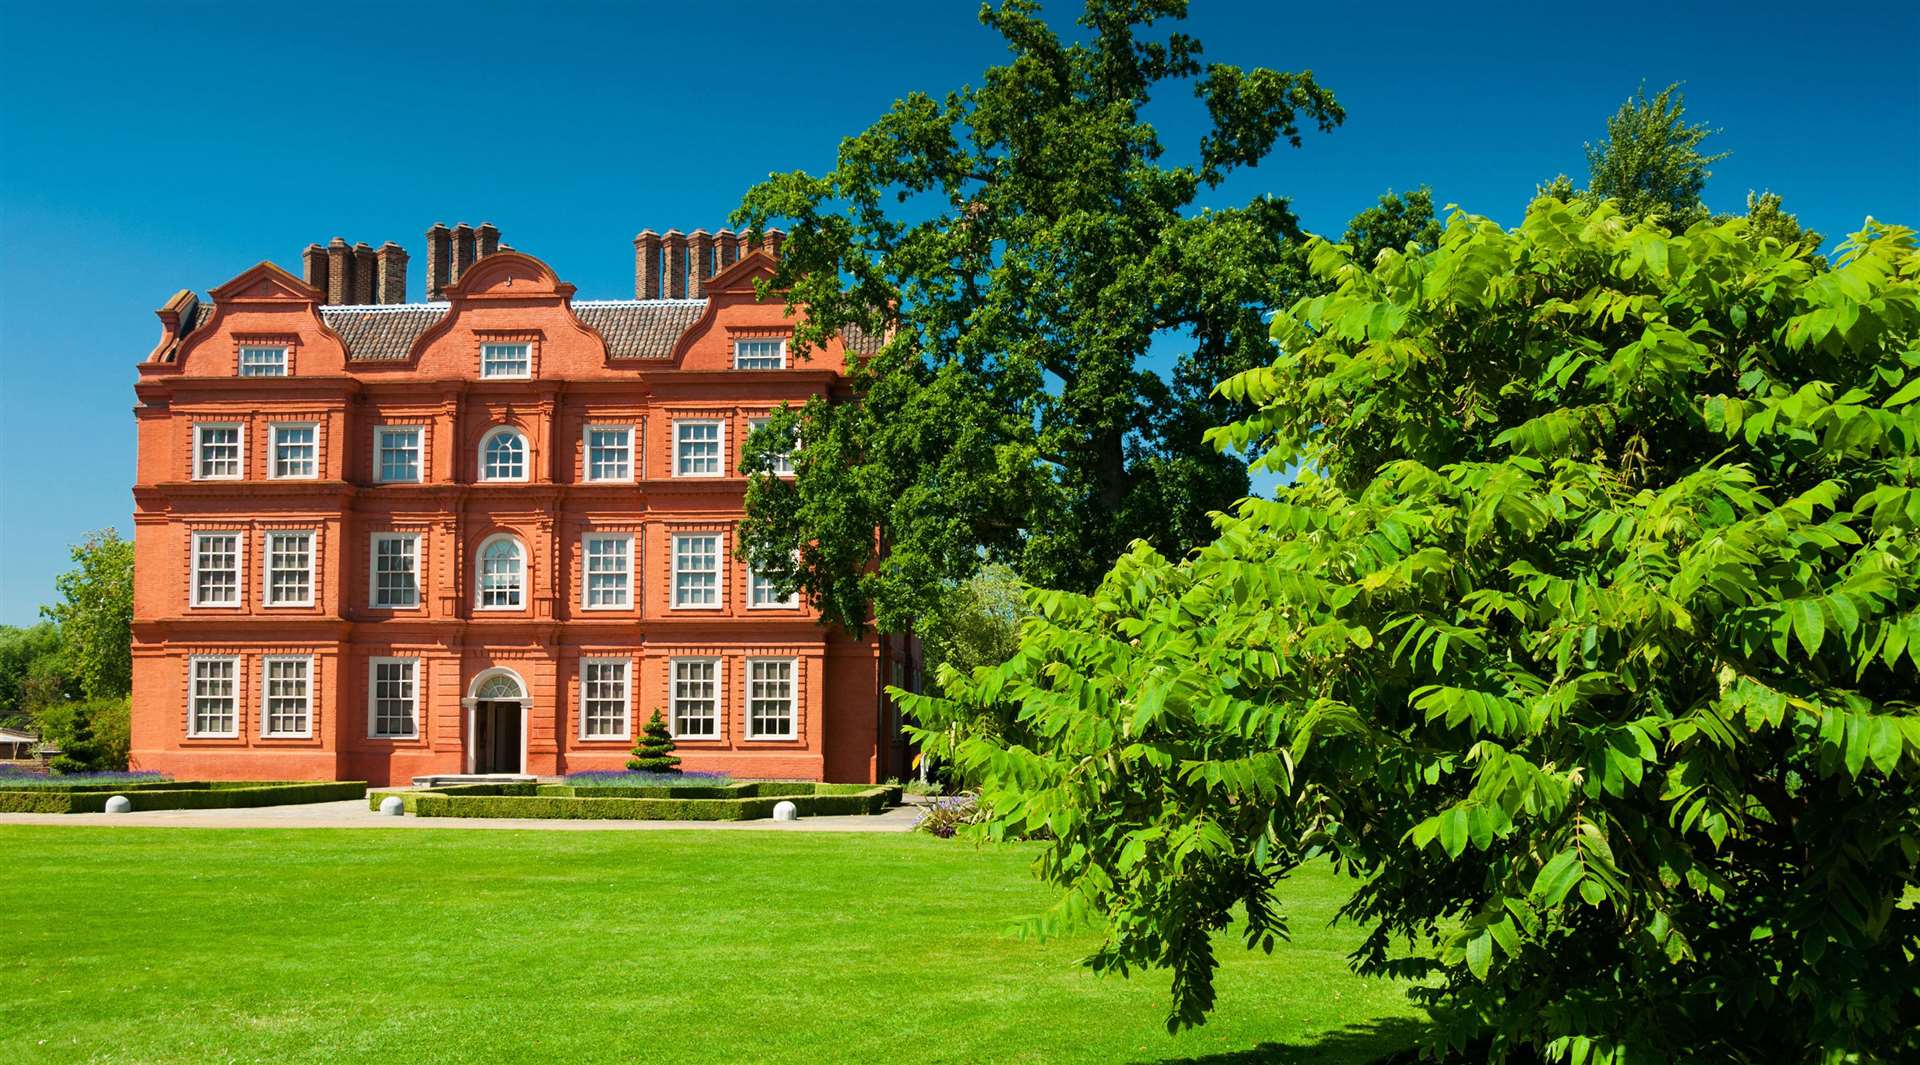 Step inside Kew Palace and explore a beautiful royal retreat comprising princesses’ bedrooms, an intimate dining room and the newly restored Georgian Royal Kitchens.